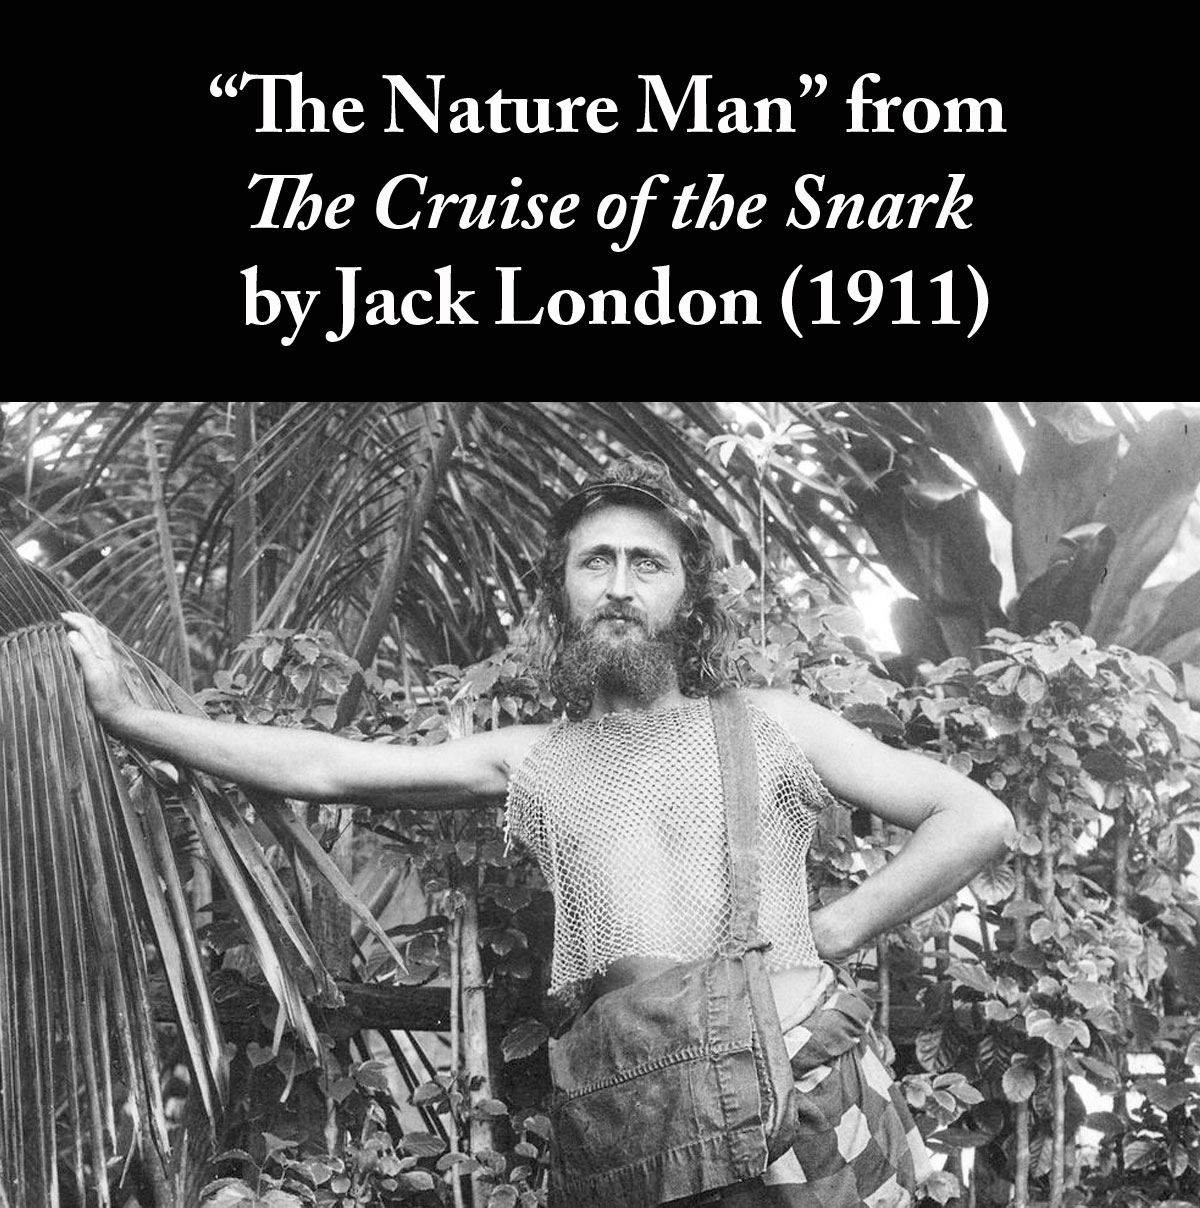 The Nature Man from The Cruise of the Snark by Jack London (1911)